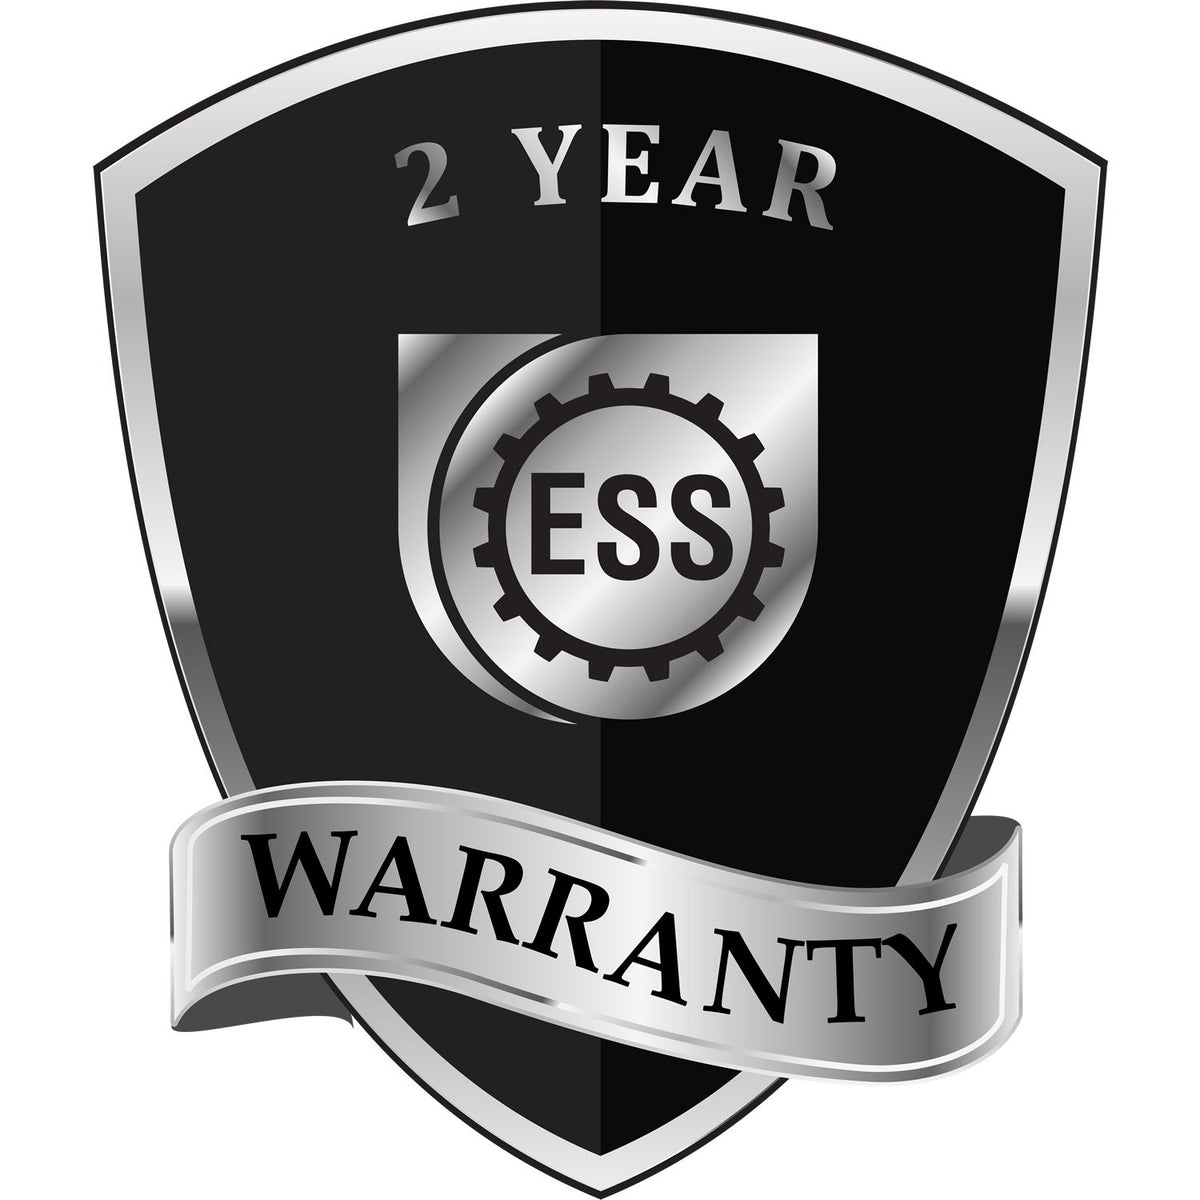 A black and silver badge or emblem showing warranty information for the State of Connecticut Extended Long Reach Geologist Seal